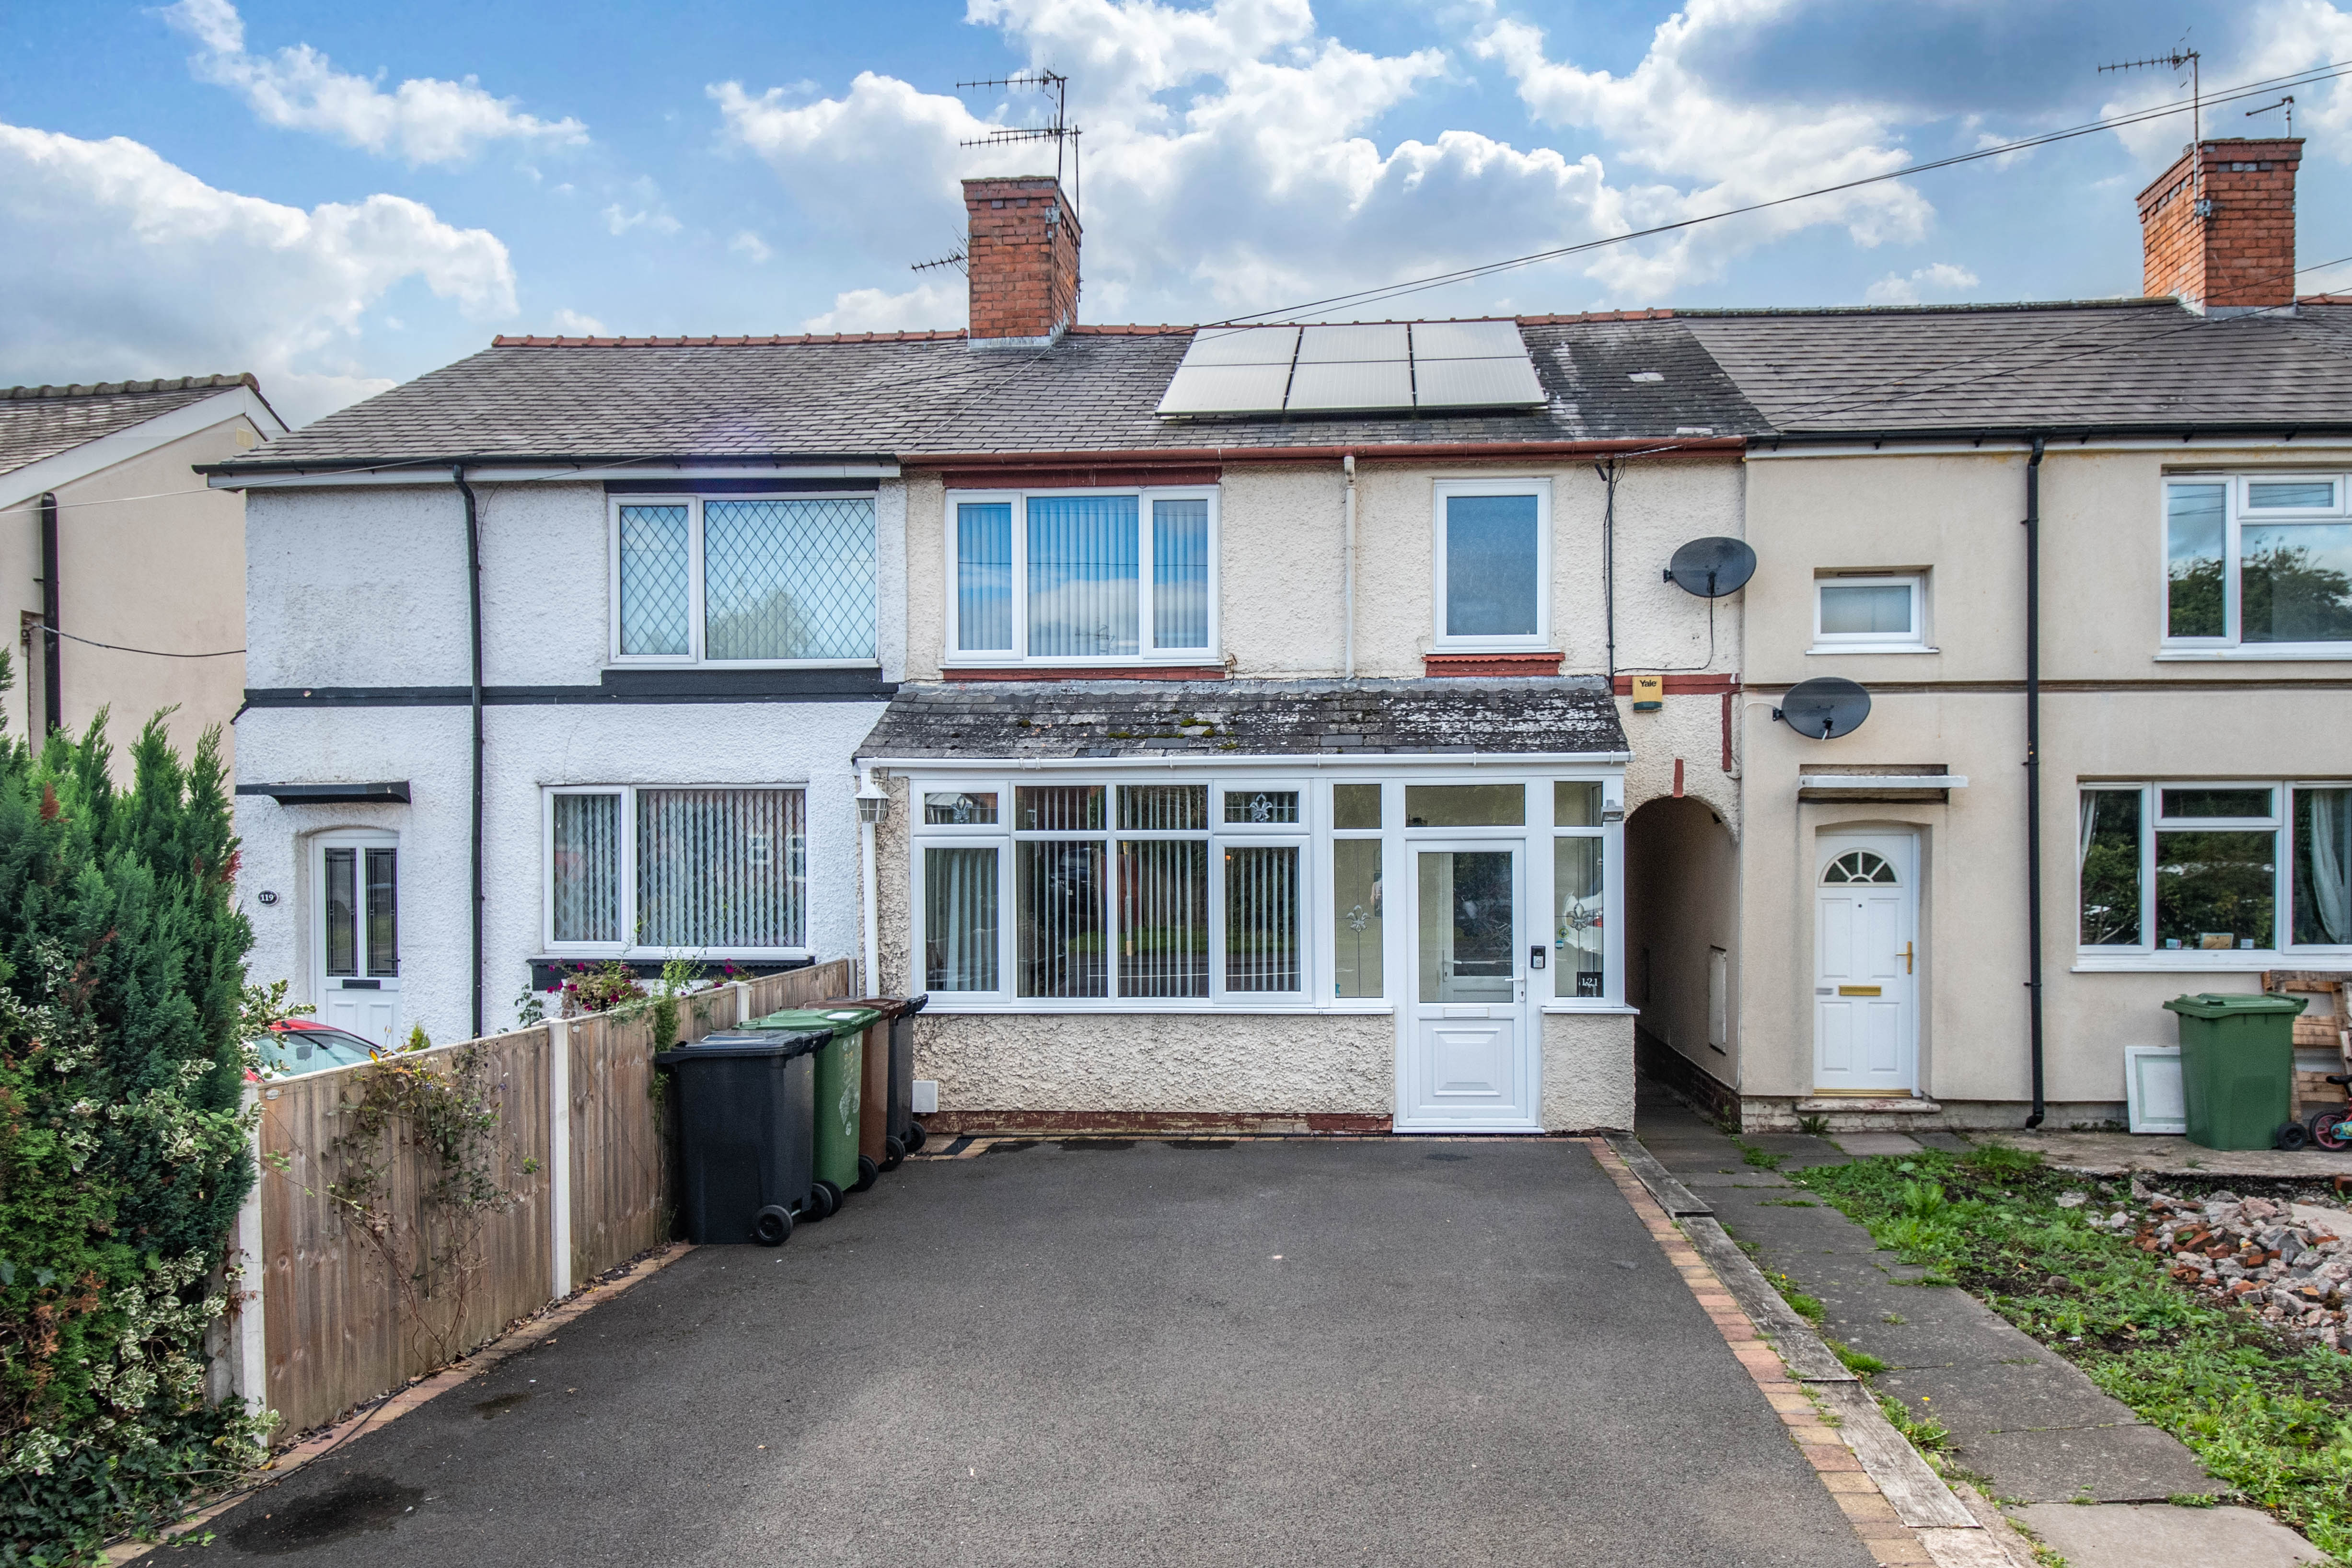 3 bed house for sale in Woodrow Lane, Catshill - Property Image 1